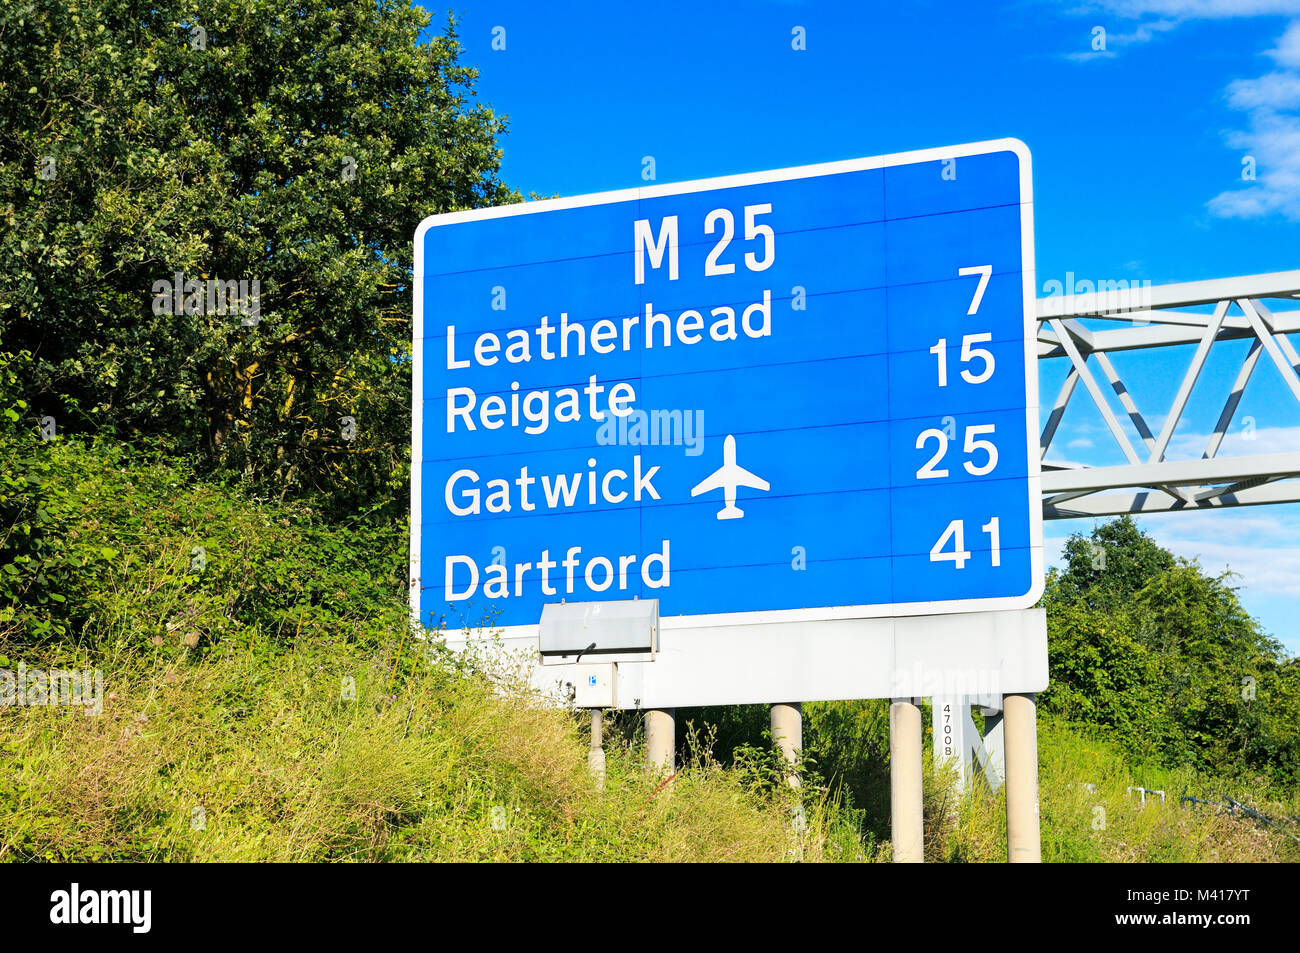 M25 motorway sign around Junction 10 showing distances to Leatherhead, Reigate, Gatwick and Dartford Stock Photo